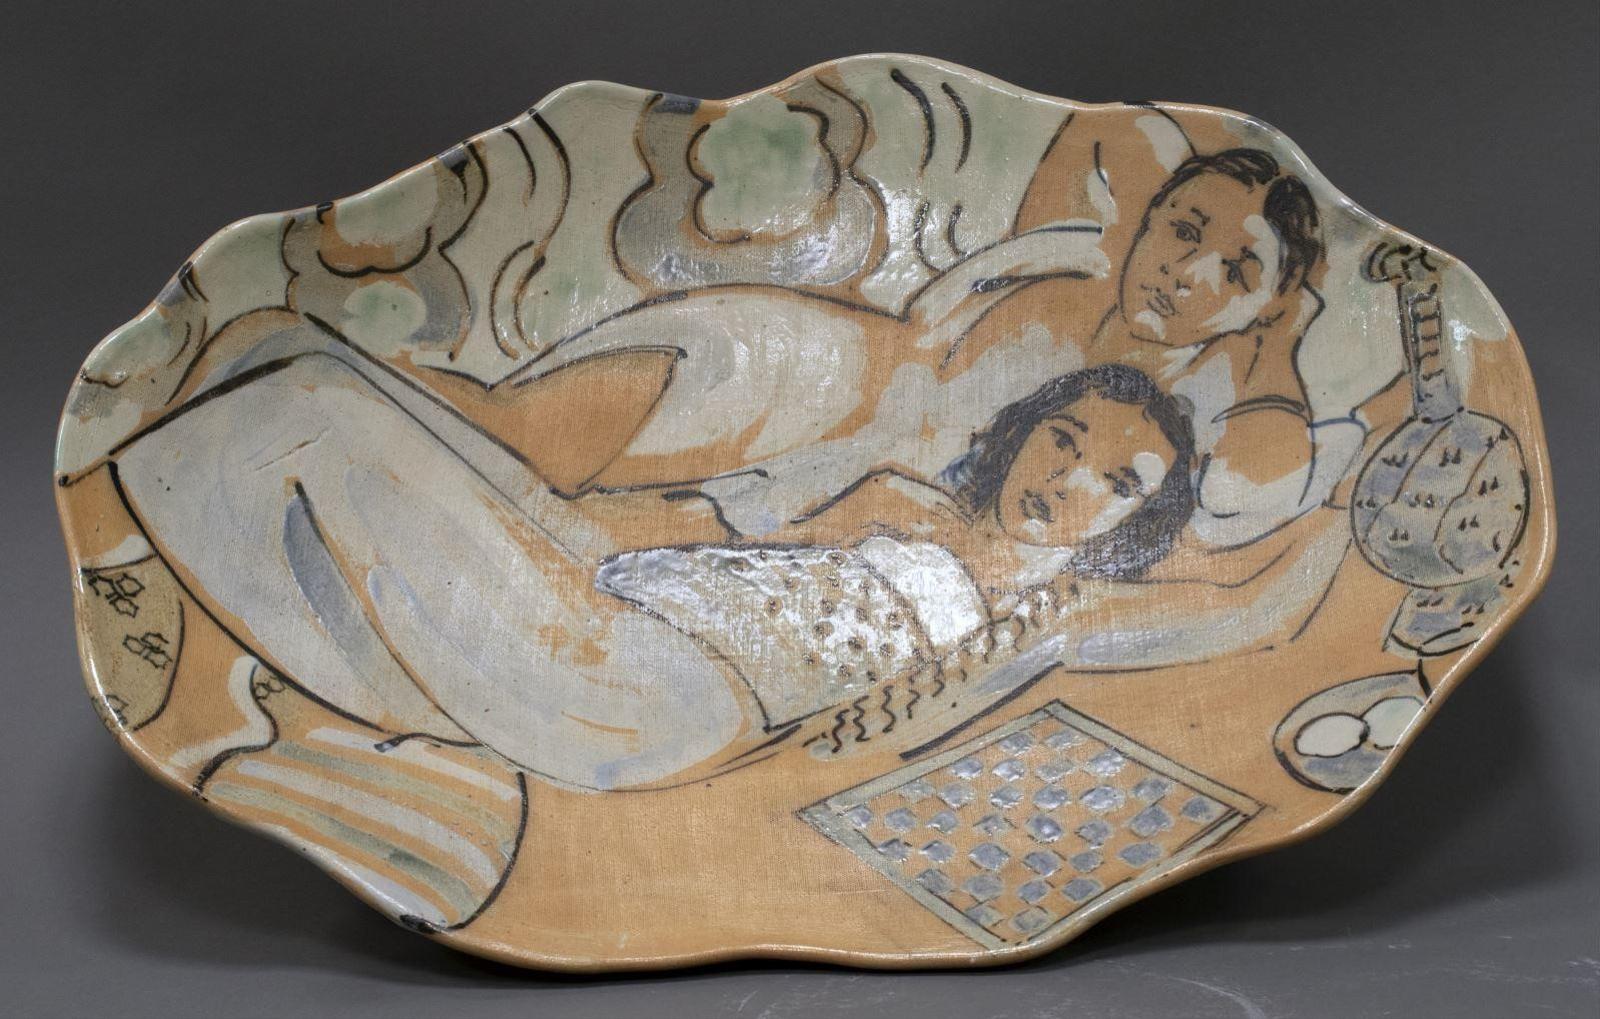 Carol (1948) - Young Odalisques In Morocco (Ode To Matisse) - Oval Pedestal Platter; 1989